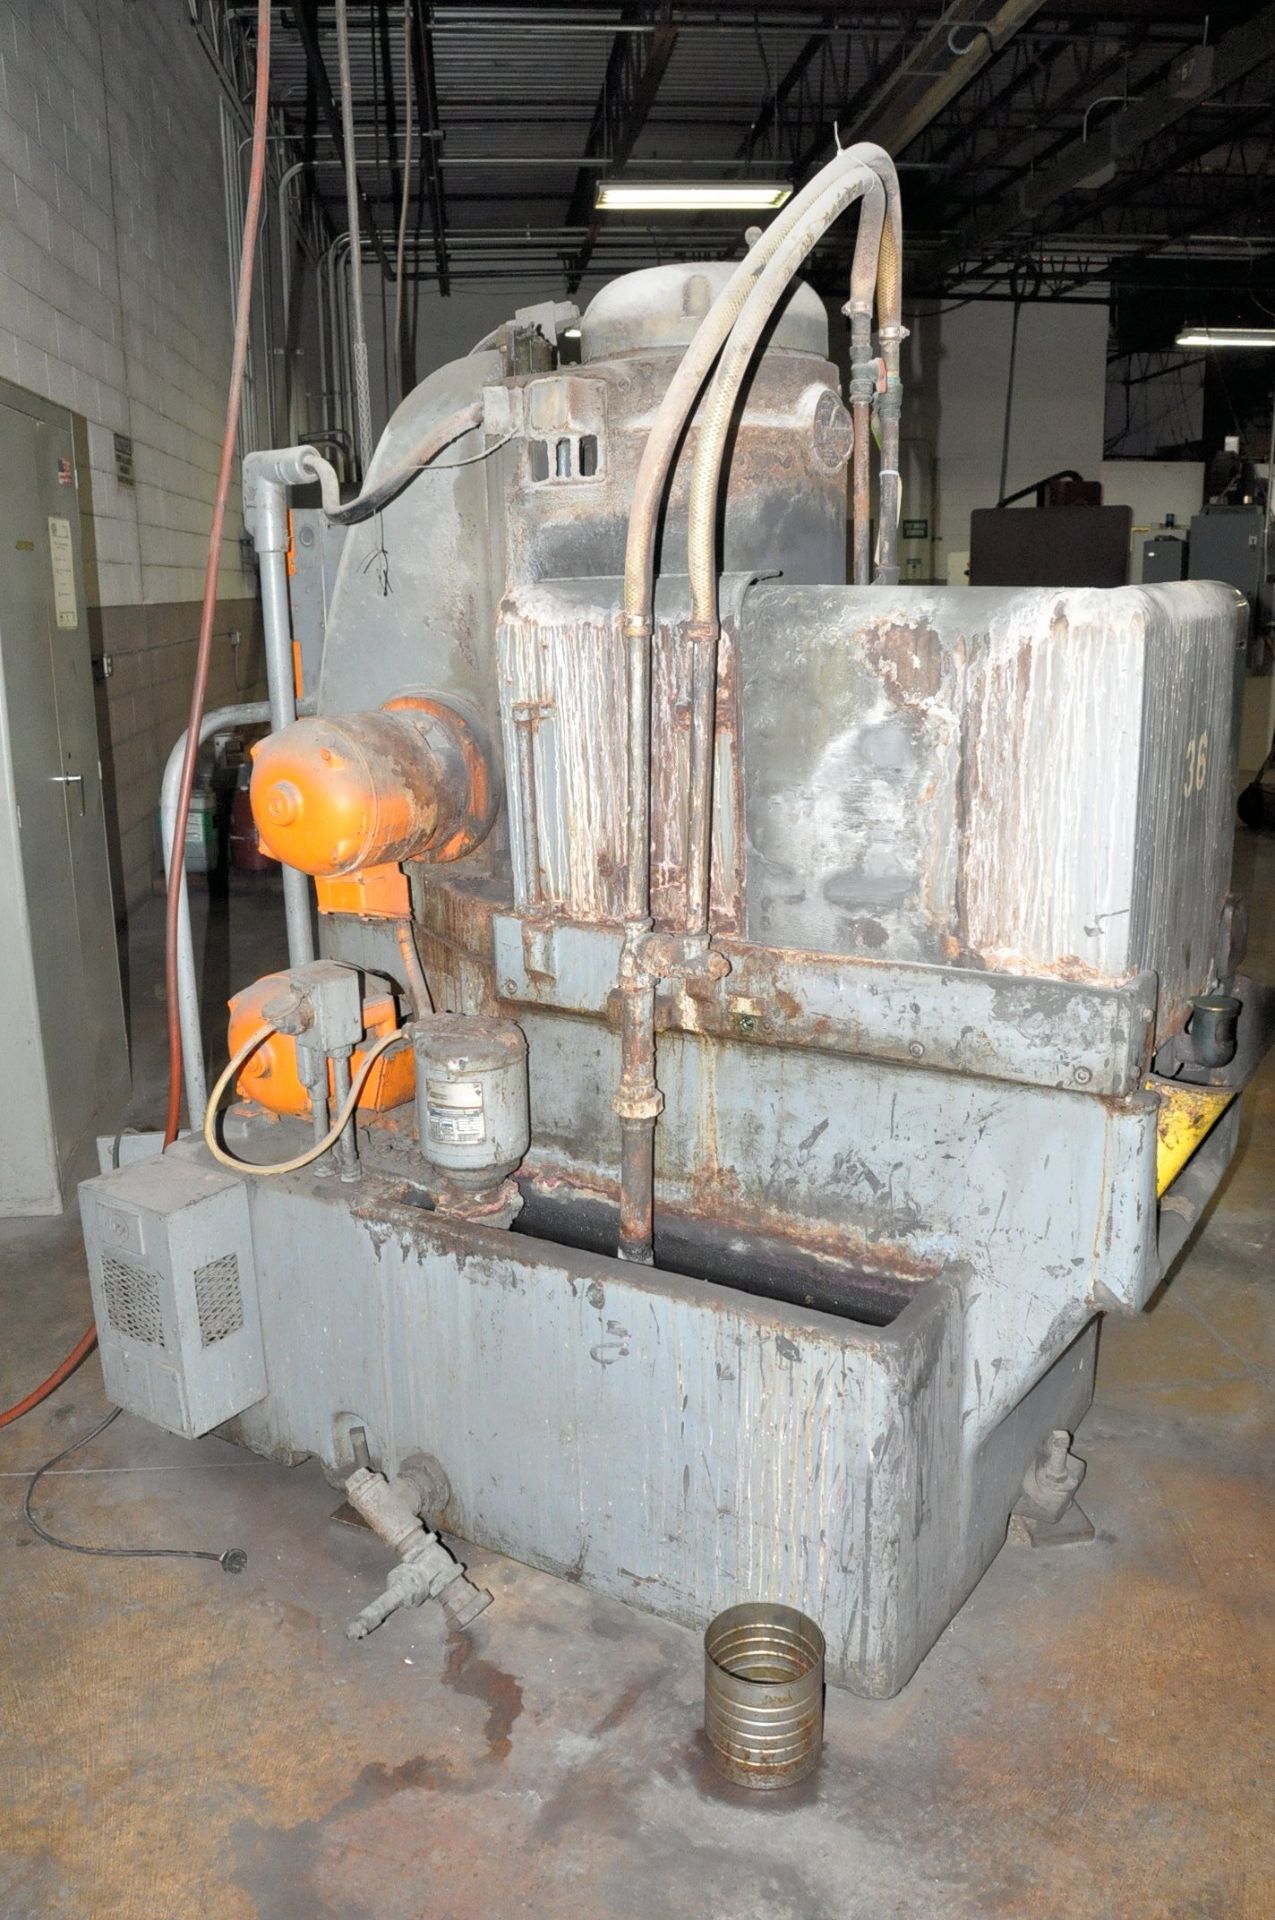 BLANCHARD No. 11, ROTARY SURFACE GRINDER, S/n 7380 (1953), 20" Chuck, One Piece Grinding Wheel, - Image 3 of 3